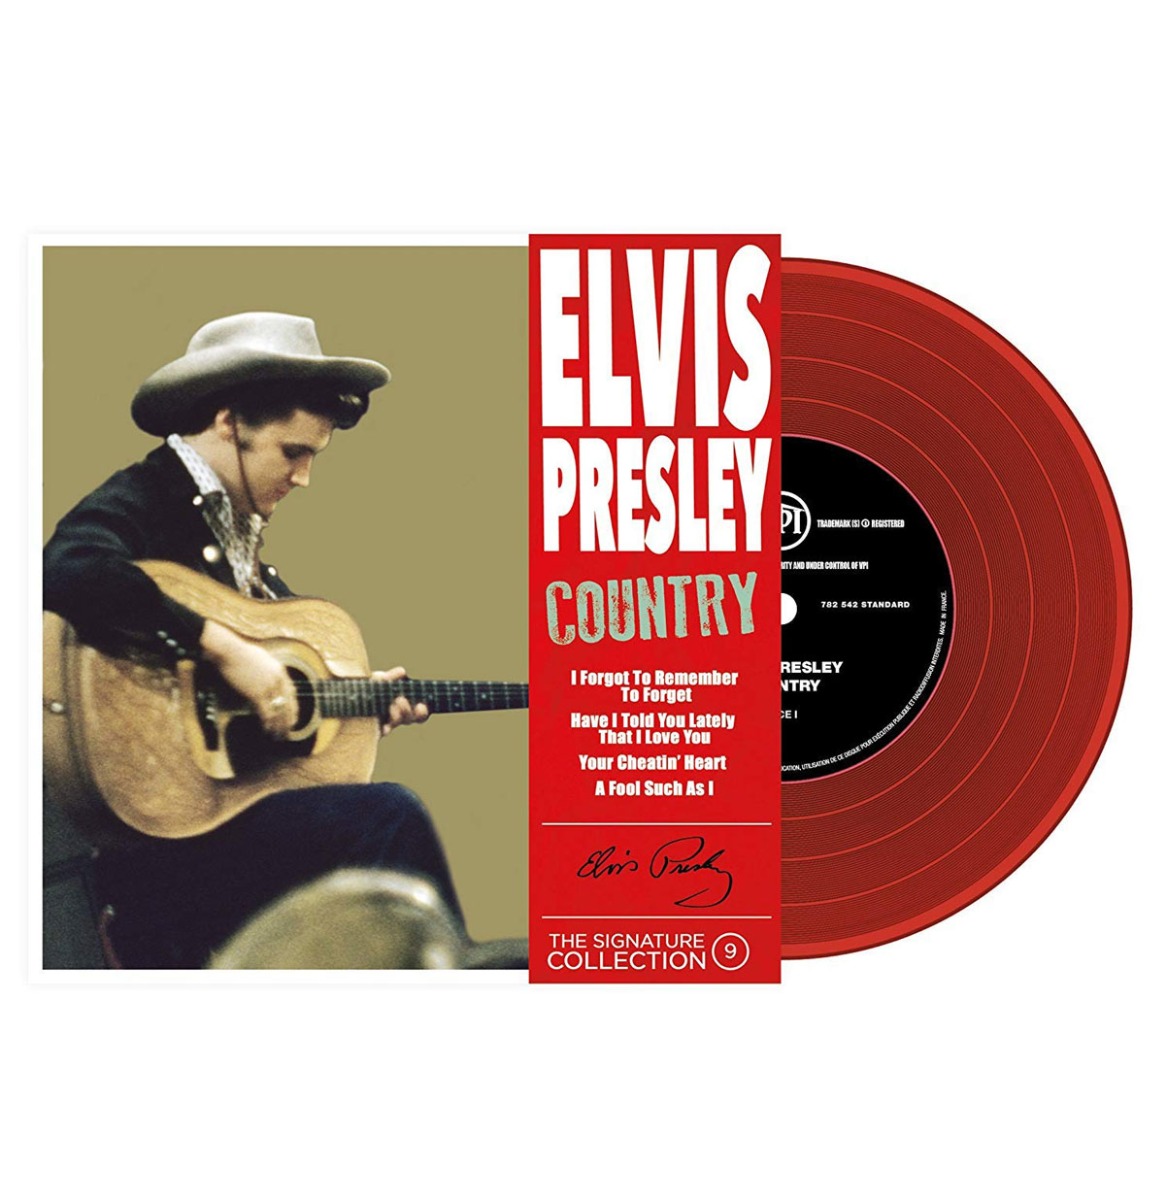 Elvis Presley - Country Signature Collection 9 EP Vinyl